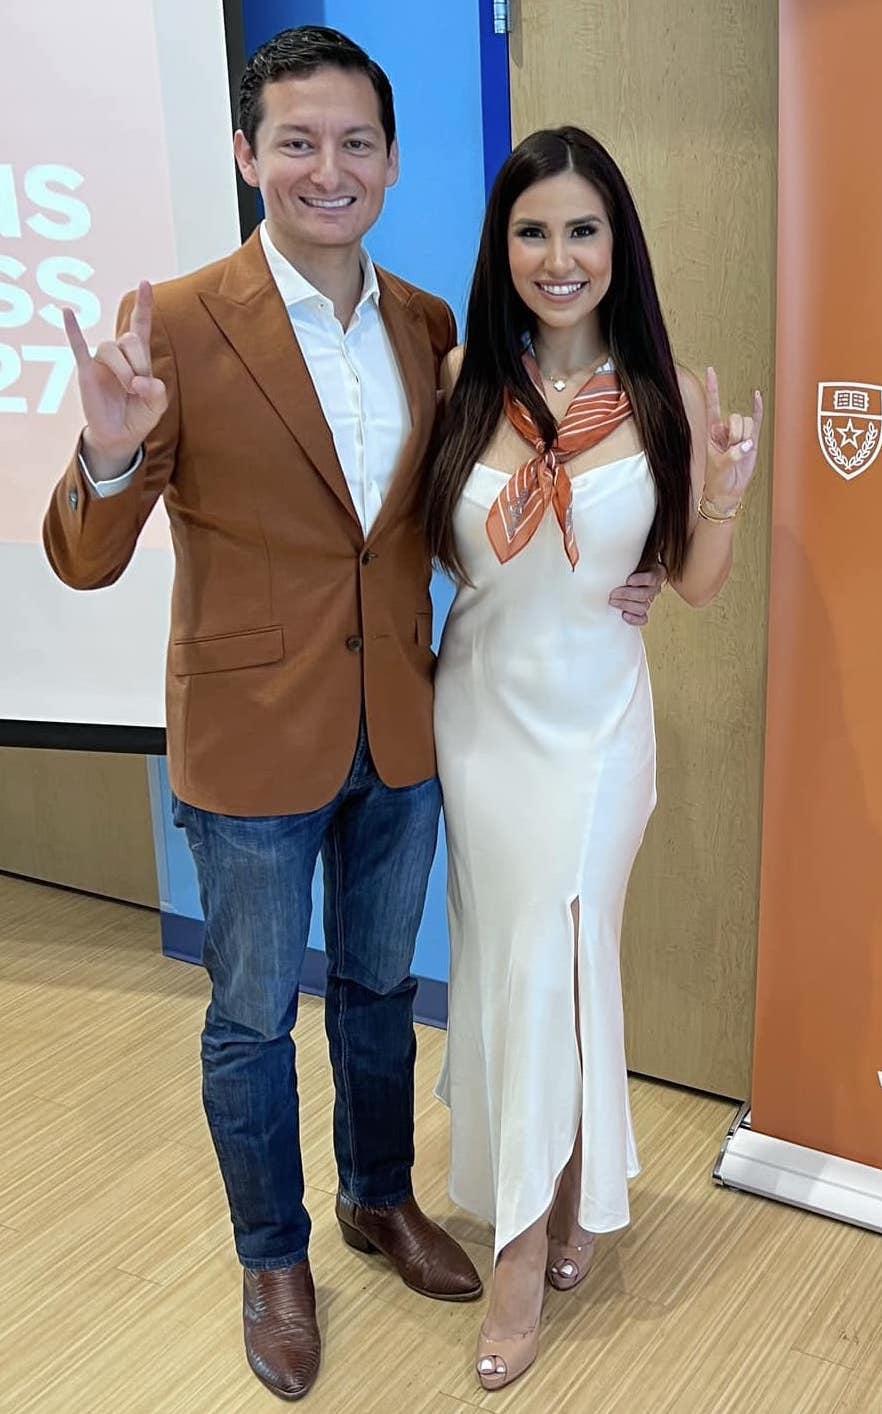 South Texas attorneys, and husband and wife Omar Ochoa and Leah Wise, flash the Hook ‘Em Horns hand signal of their alma mater, the University of Texas at Austin, during a reception held on April 15 honoring the most recent group of Rio Grande Valley students  to be admitted to the school. Photo Courtesy Omar Ochoa Facebook